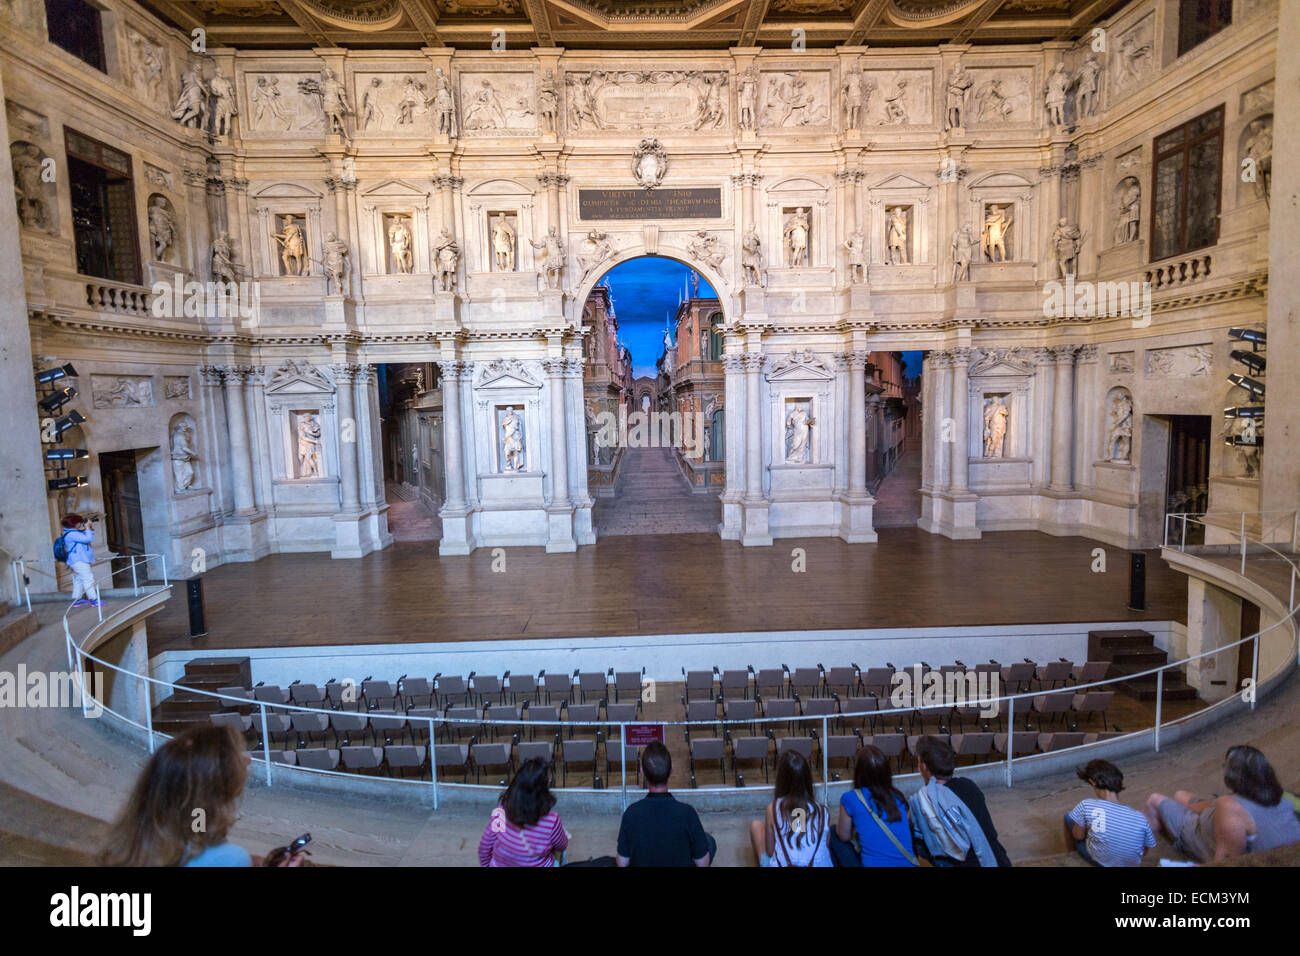 Scaenae frons of the Teatro Olimpico. The large arch in the center is known as the porta regia or royal arch. By Andrea Palladio Stock Photo